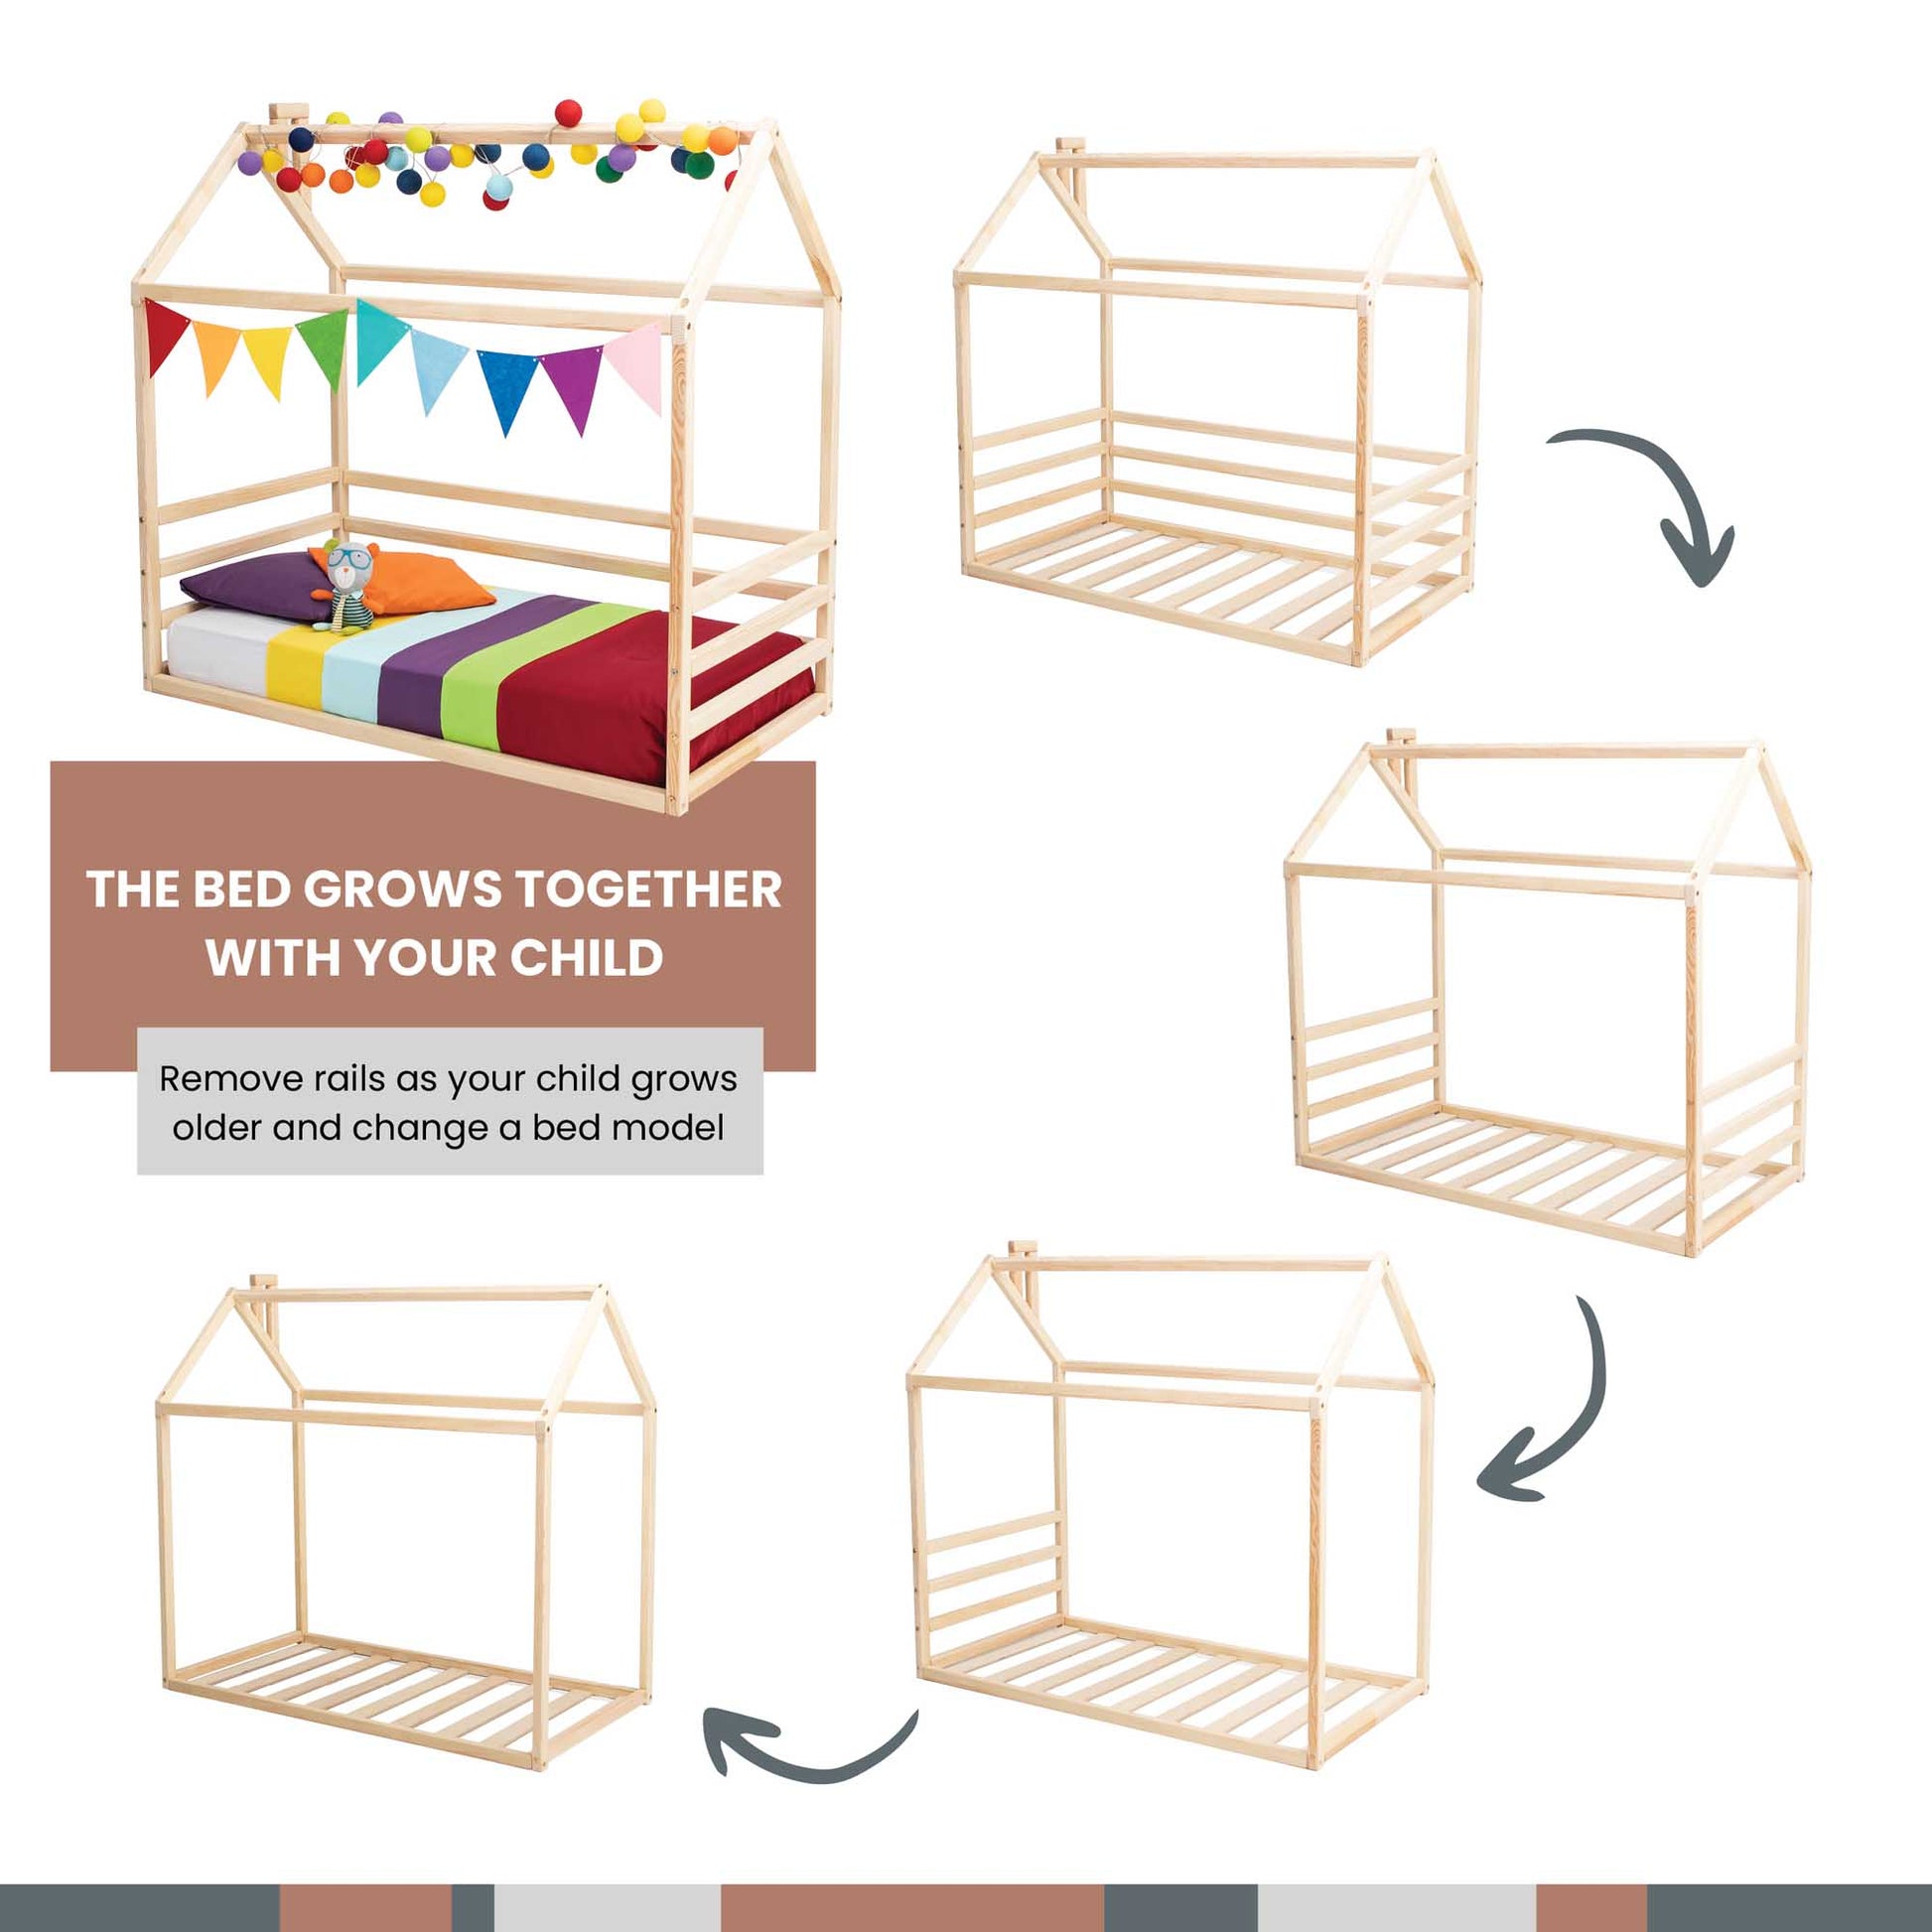 A set of images showing how to build a Kids' house-frame bed with 3-sided horizontal rails for a child's room.